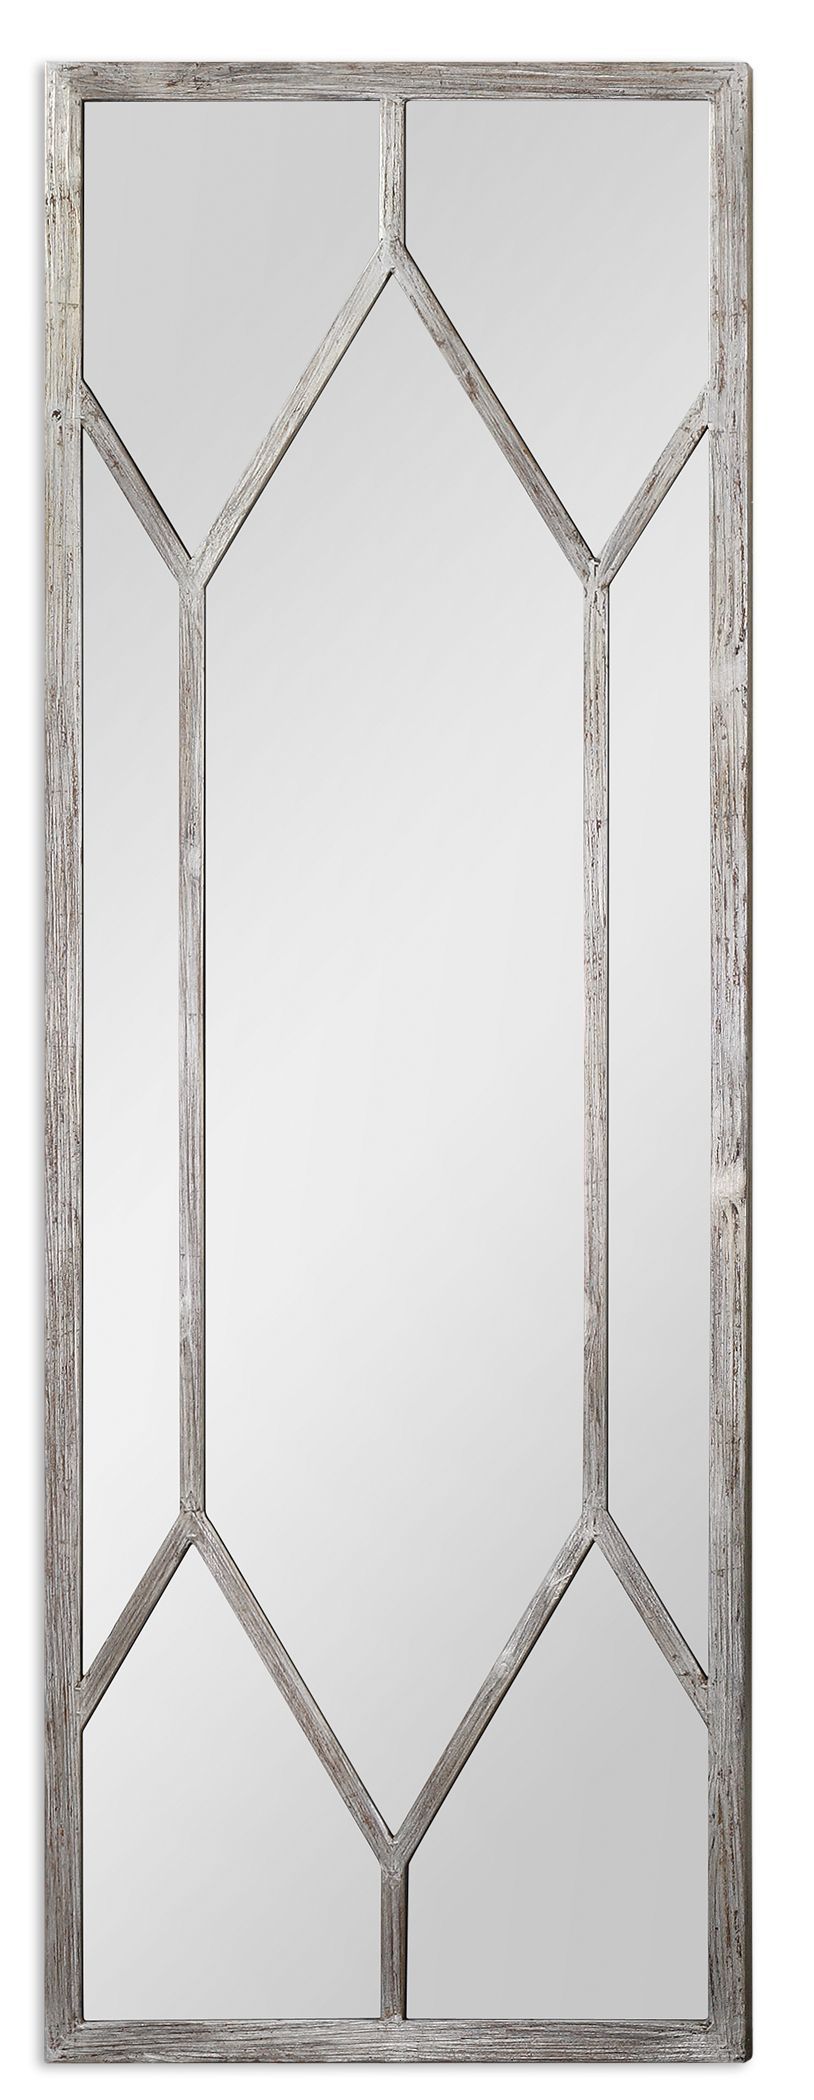 Oversized Champagne Silver Leaf Wall Floor Mirror Large 79'' Xl French Intended For Gold Leaf Floor Mirrors (View 9 of 15)